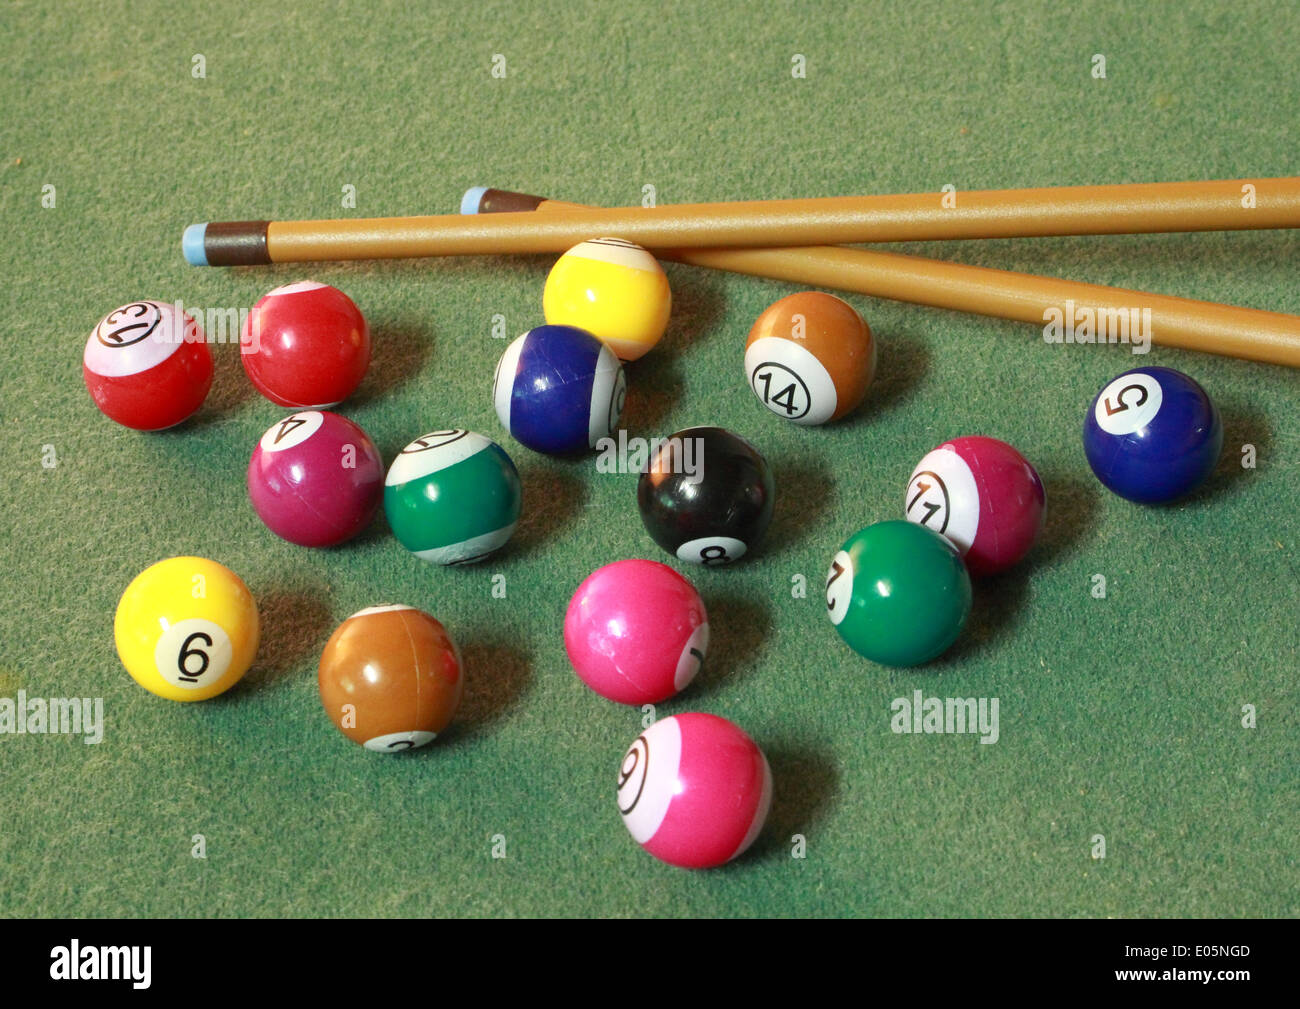 Pool balls on green cloth in disorder with cues Stock Photo